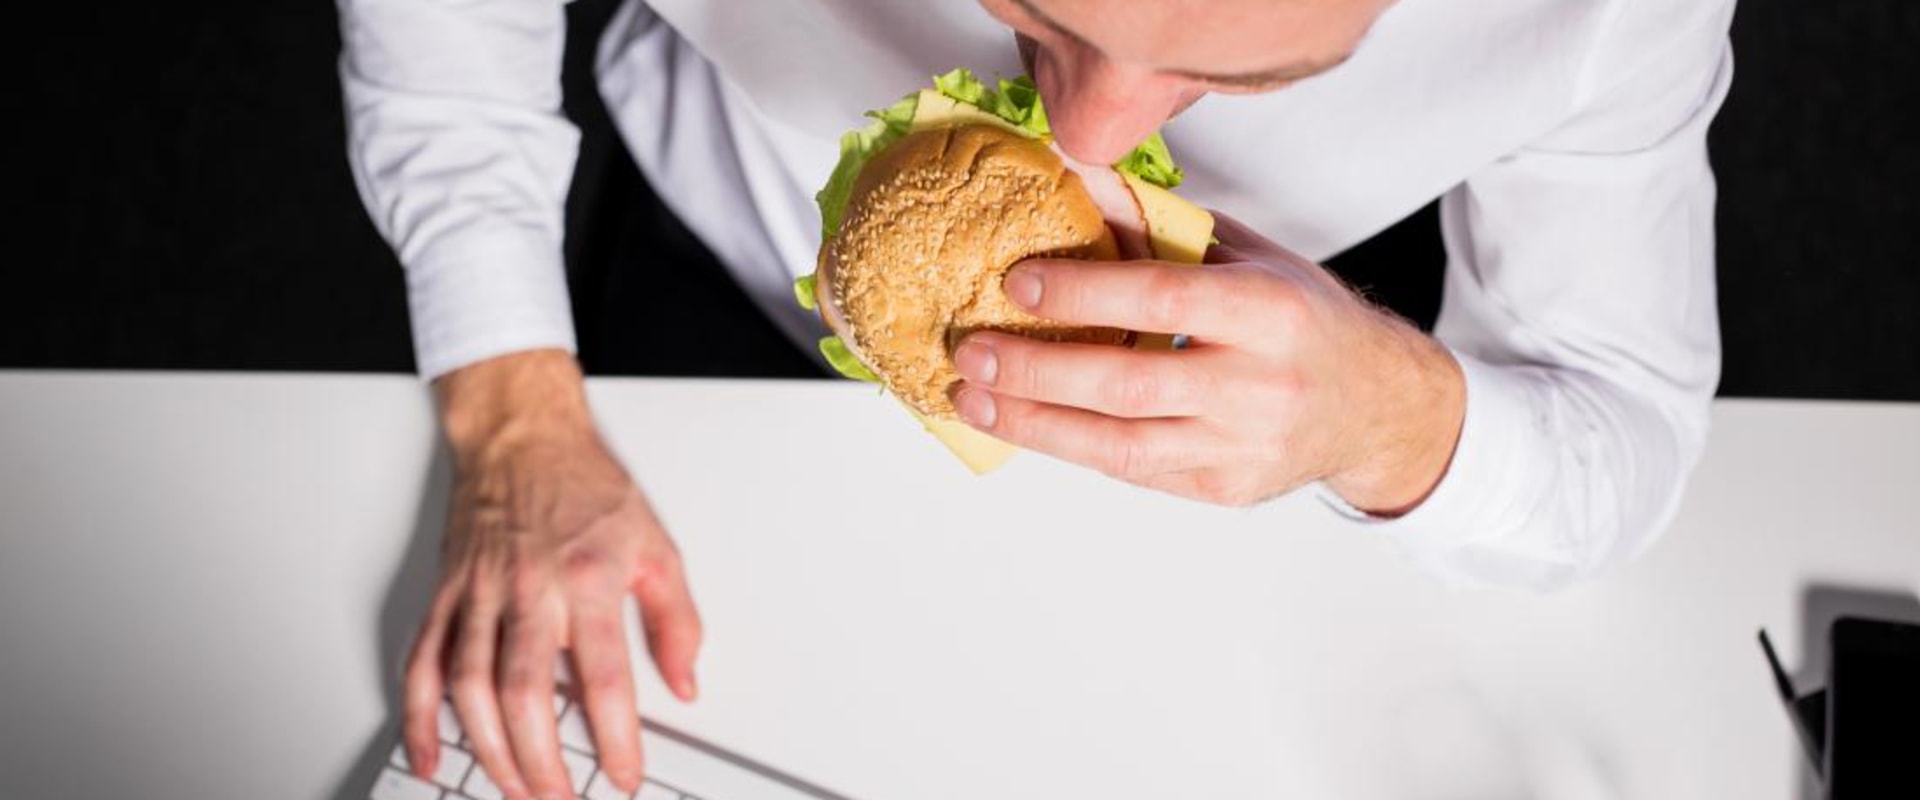 Why is working at fast food so stressful?